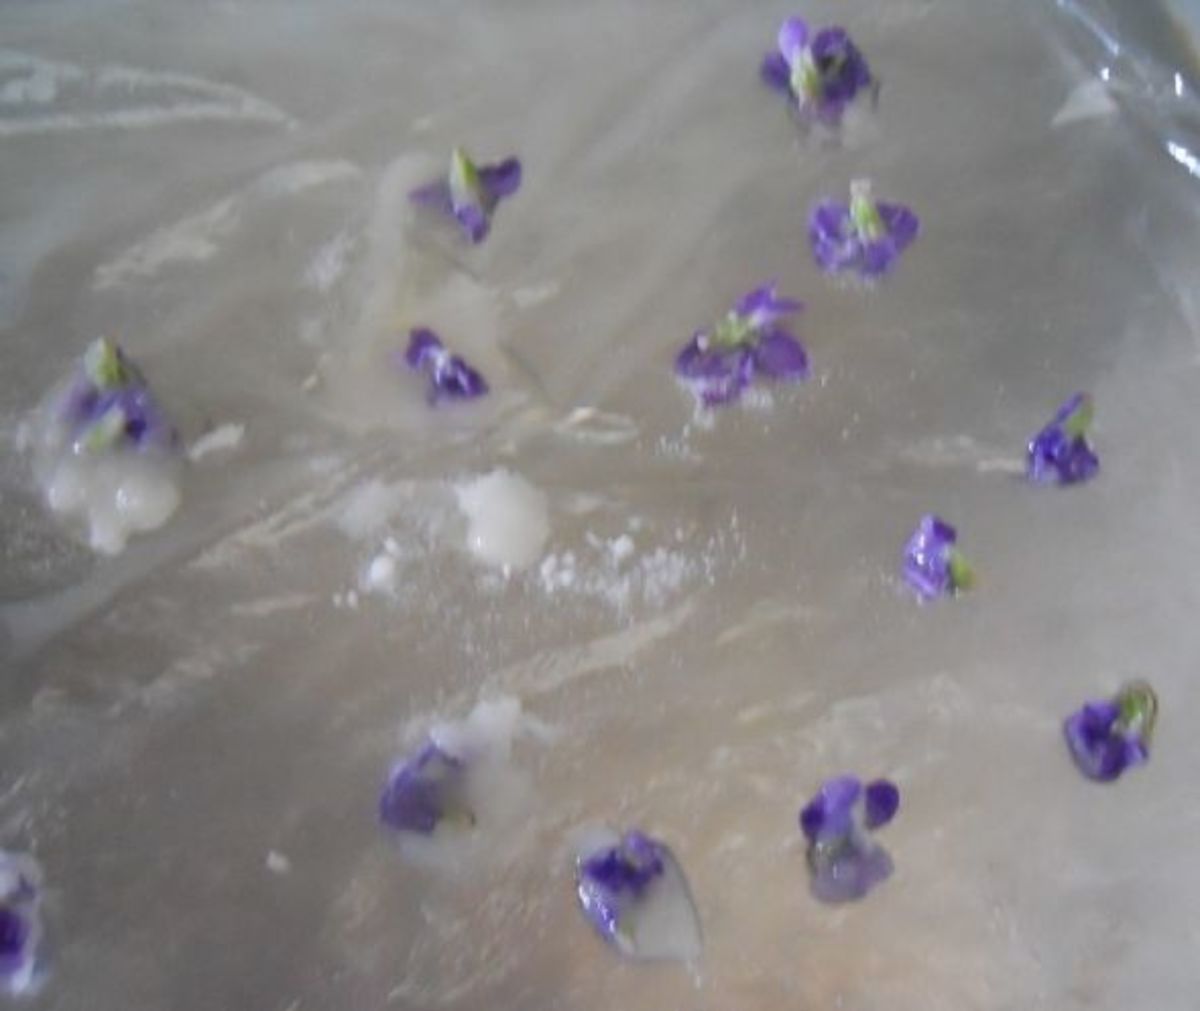 Globs of Violets - They Didn't Turn Out The Way I Expected 